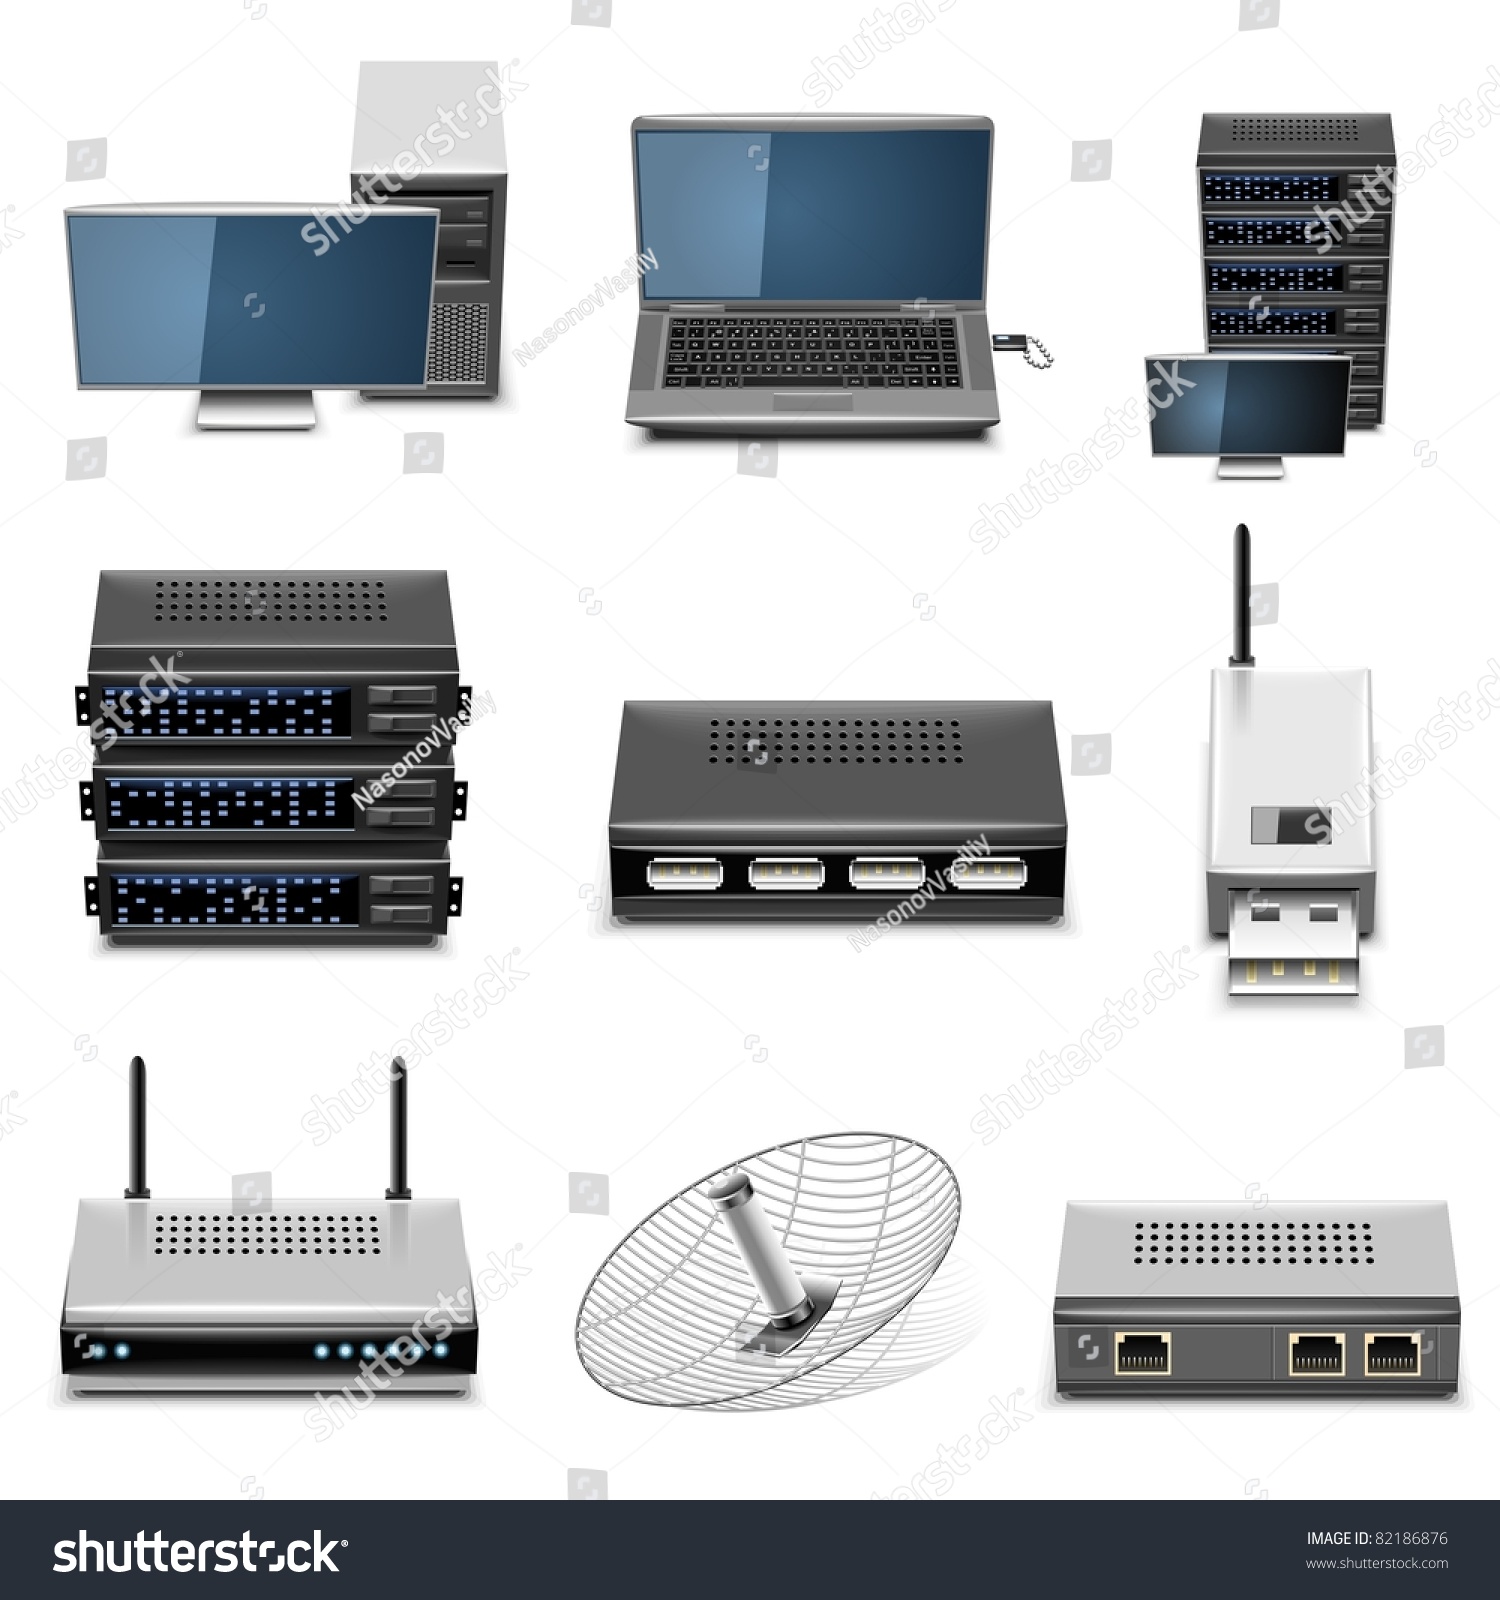 Server collection